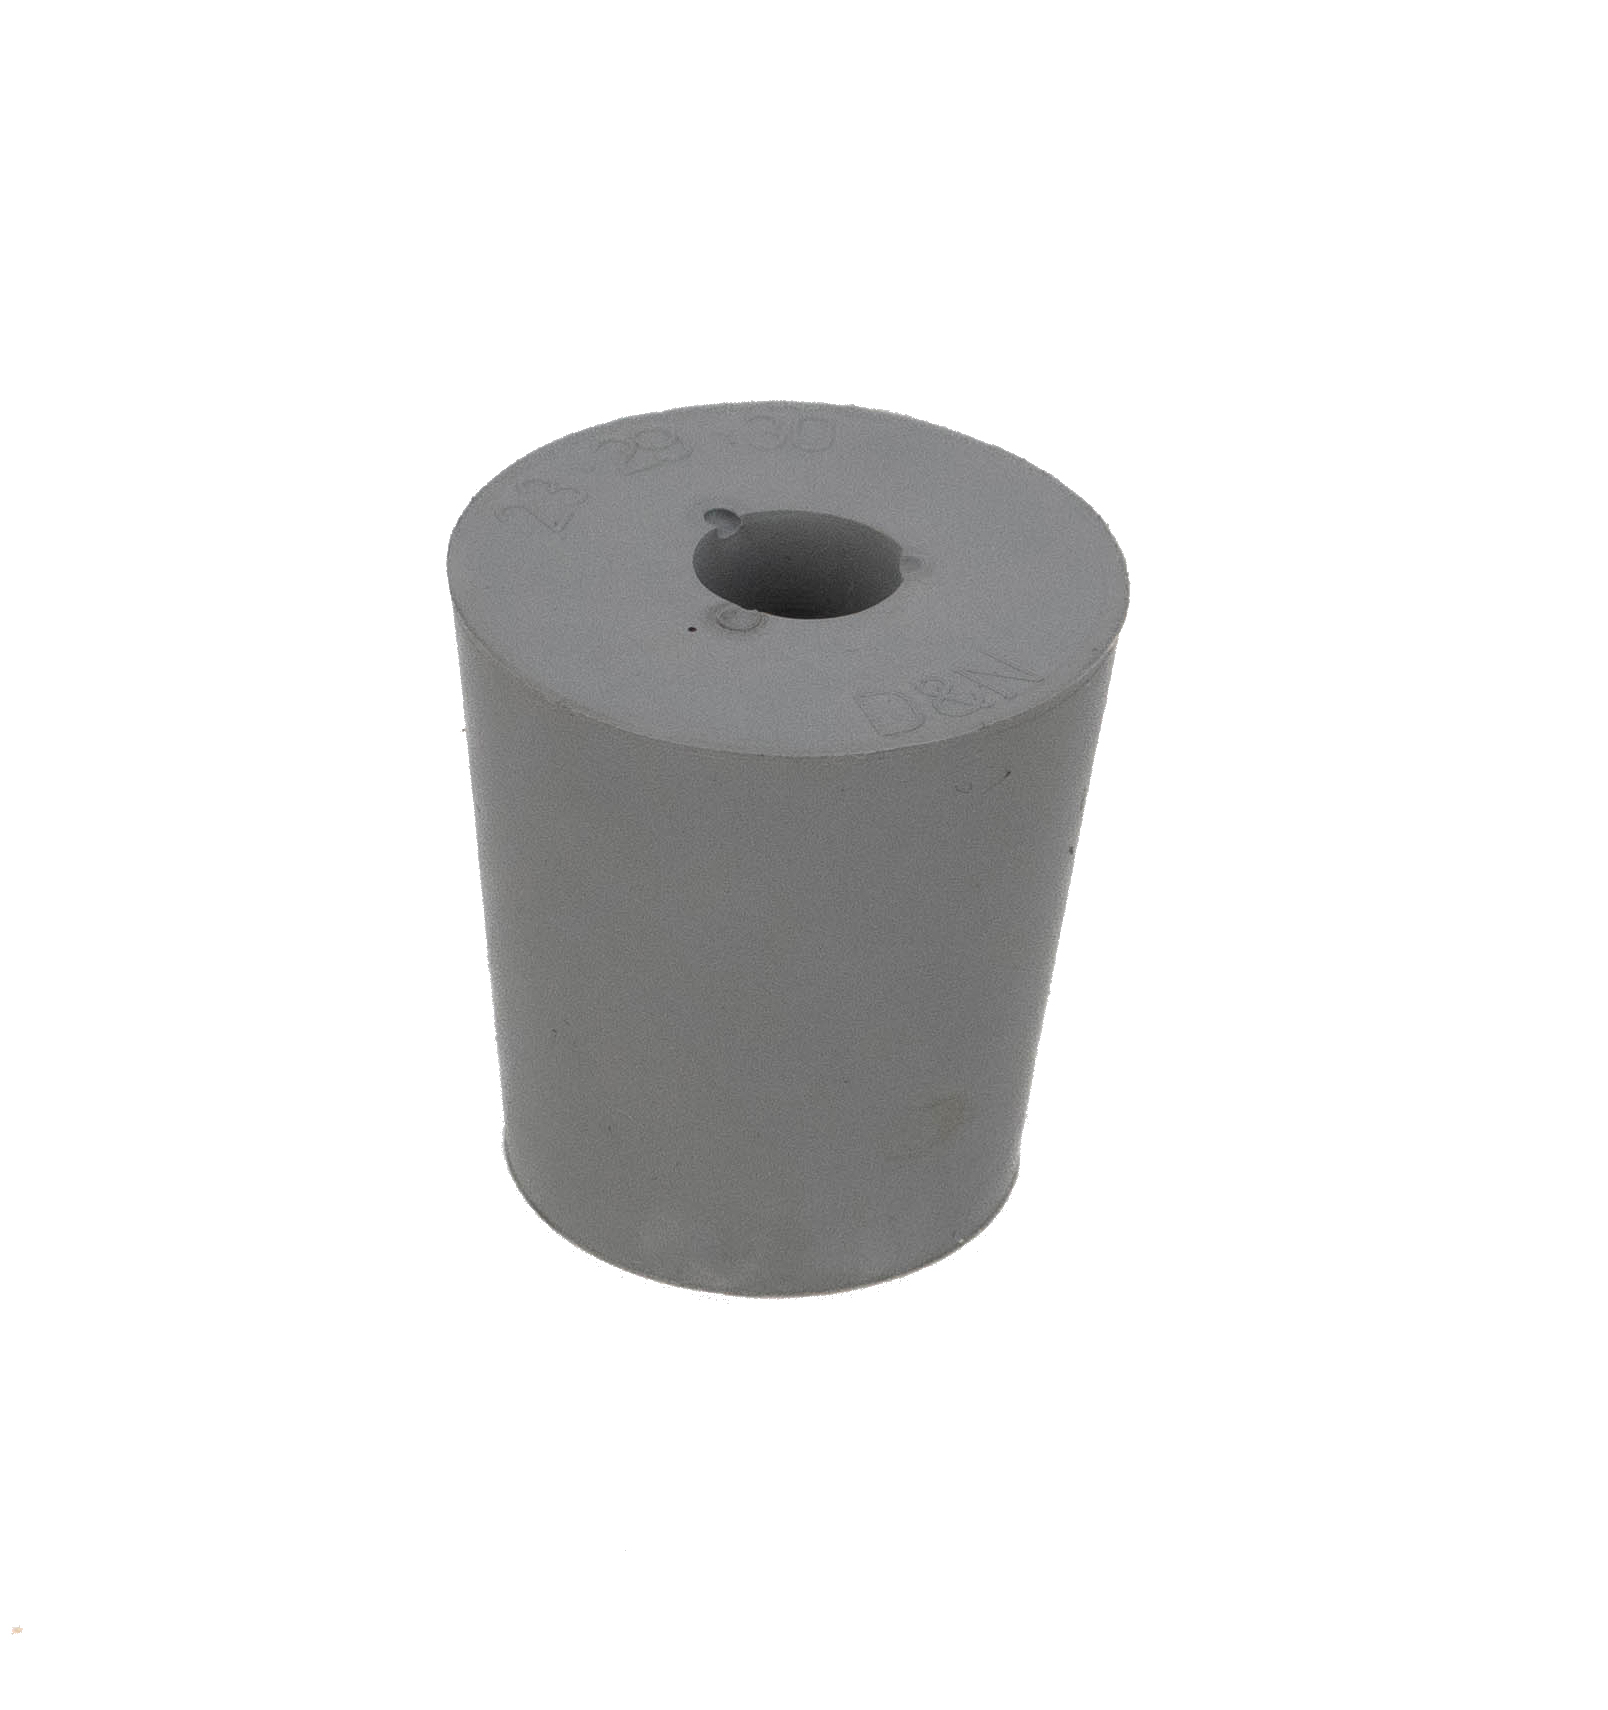 Rubber stopper grey 23 x 29 mm with hole 9 mm